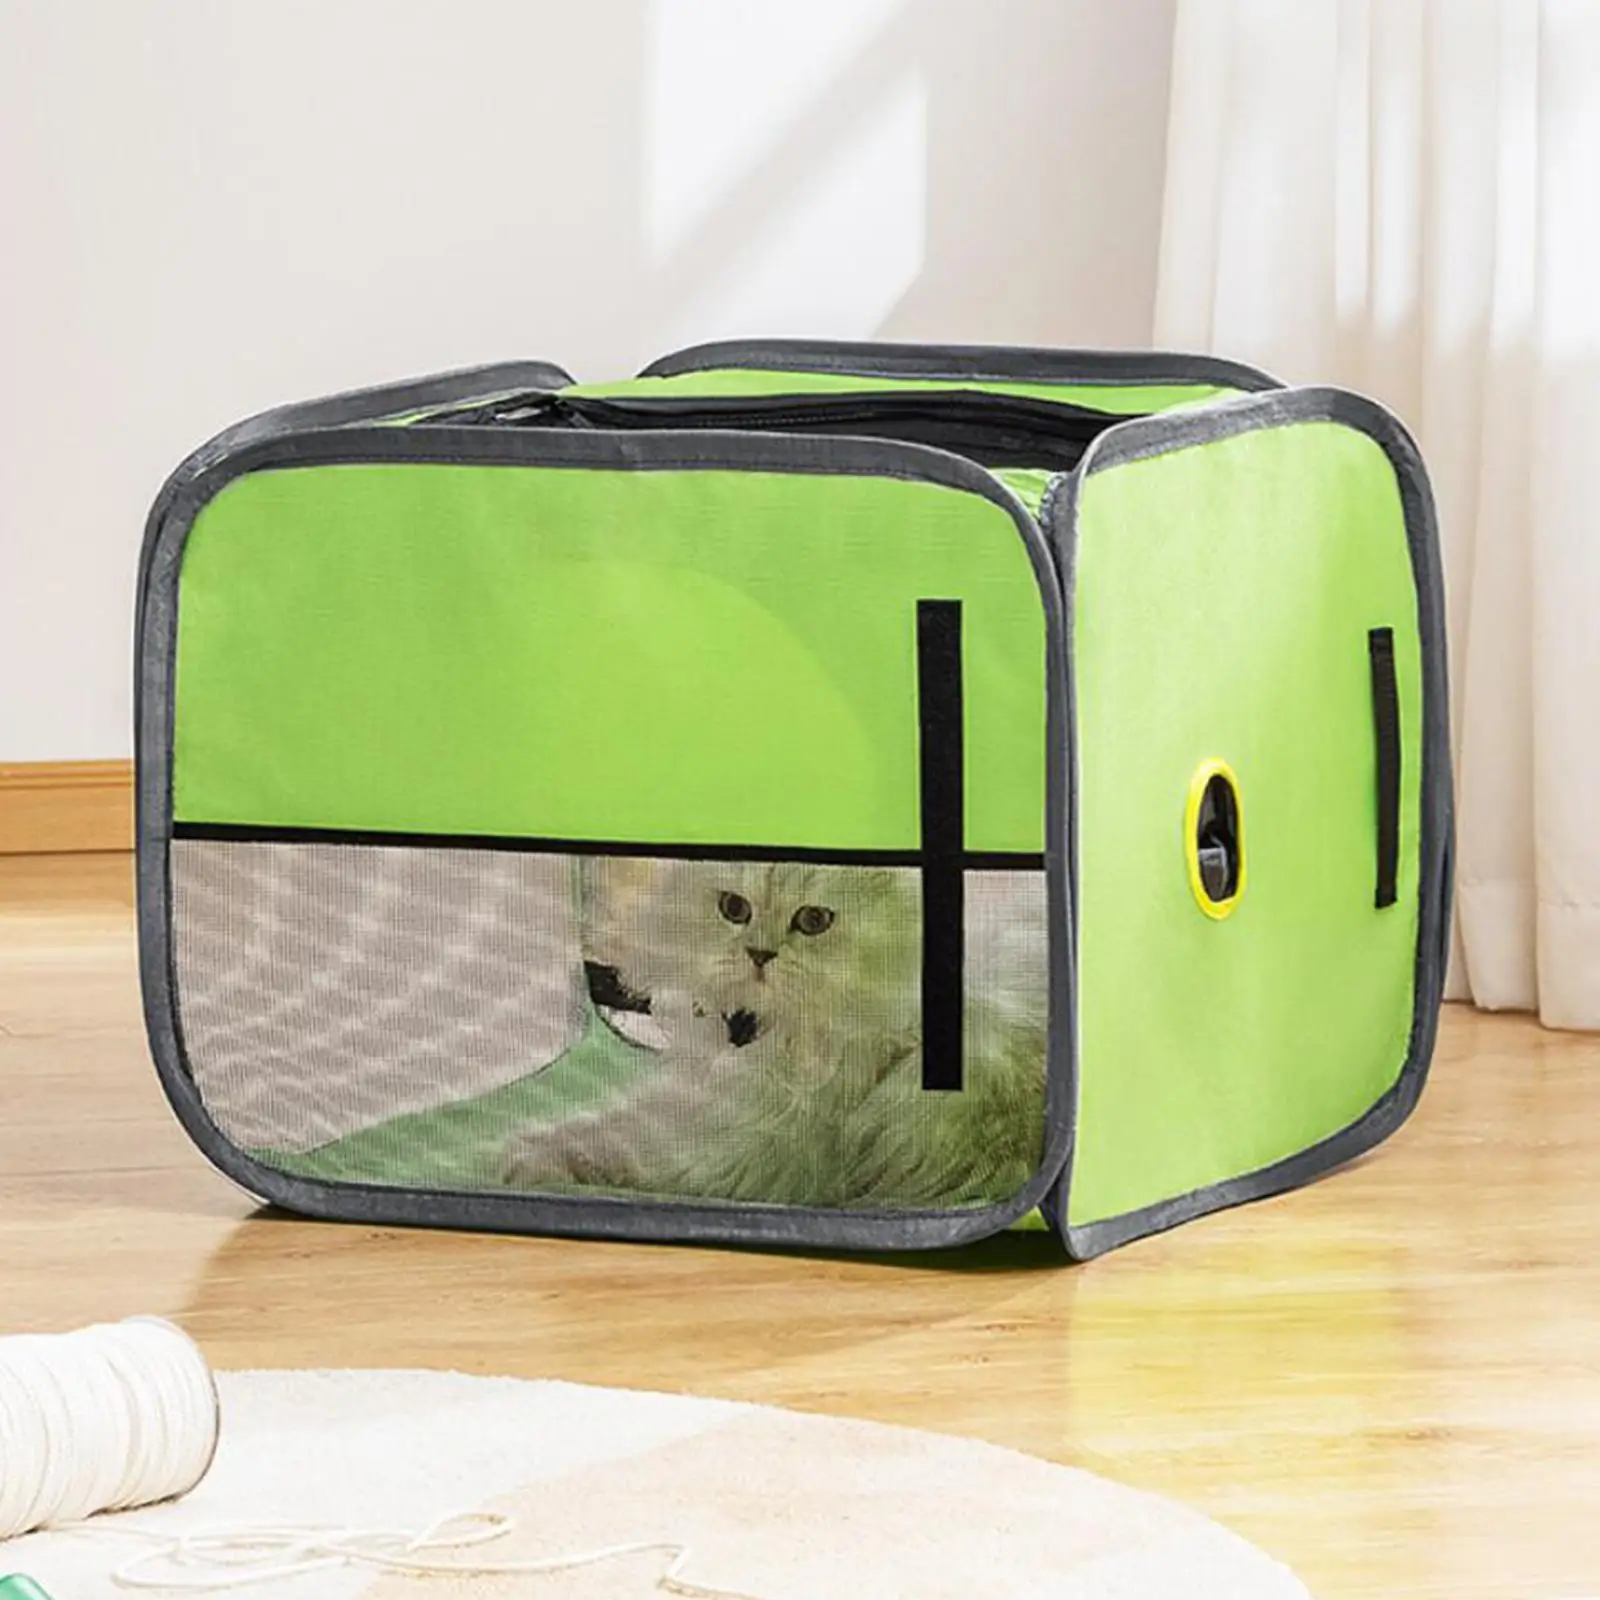 Cats Dogs Dryer Cage Hair Dryer Clean House Grooming Portable Pet Drying Box Drying Room for Puppy Kitten Doggy Outdoor Bath